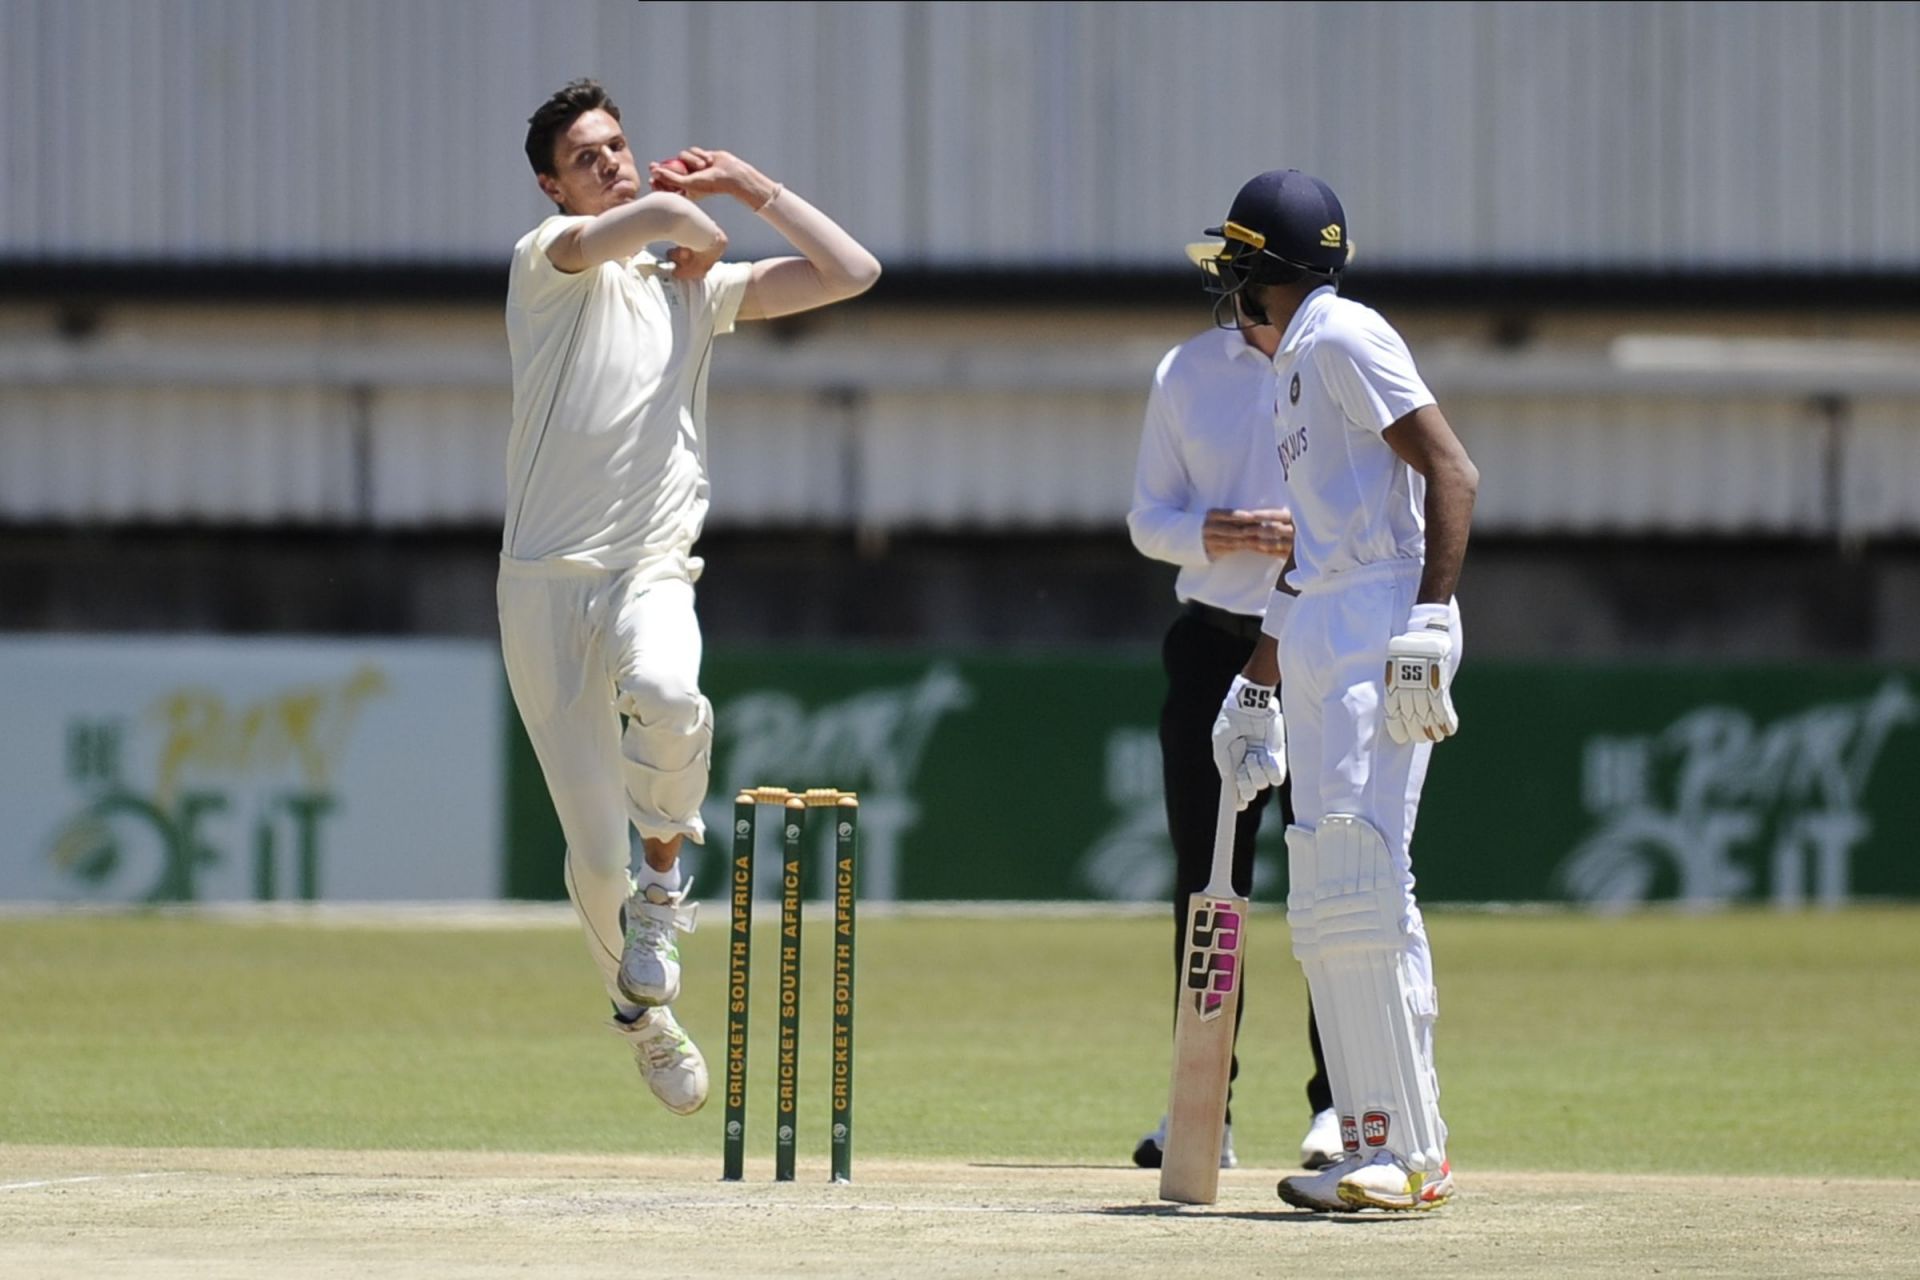 Jansen was top-class during his debut Test series against India picking up 19 wickets in three matches.